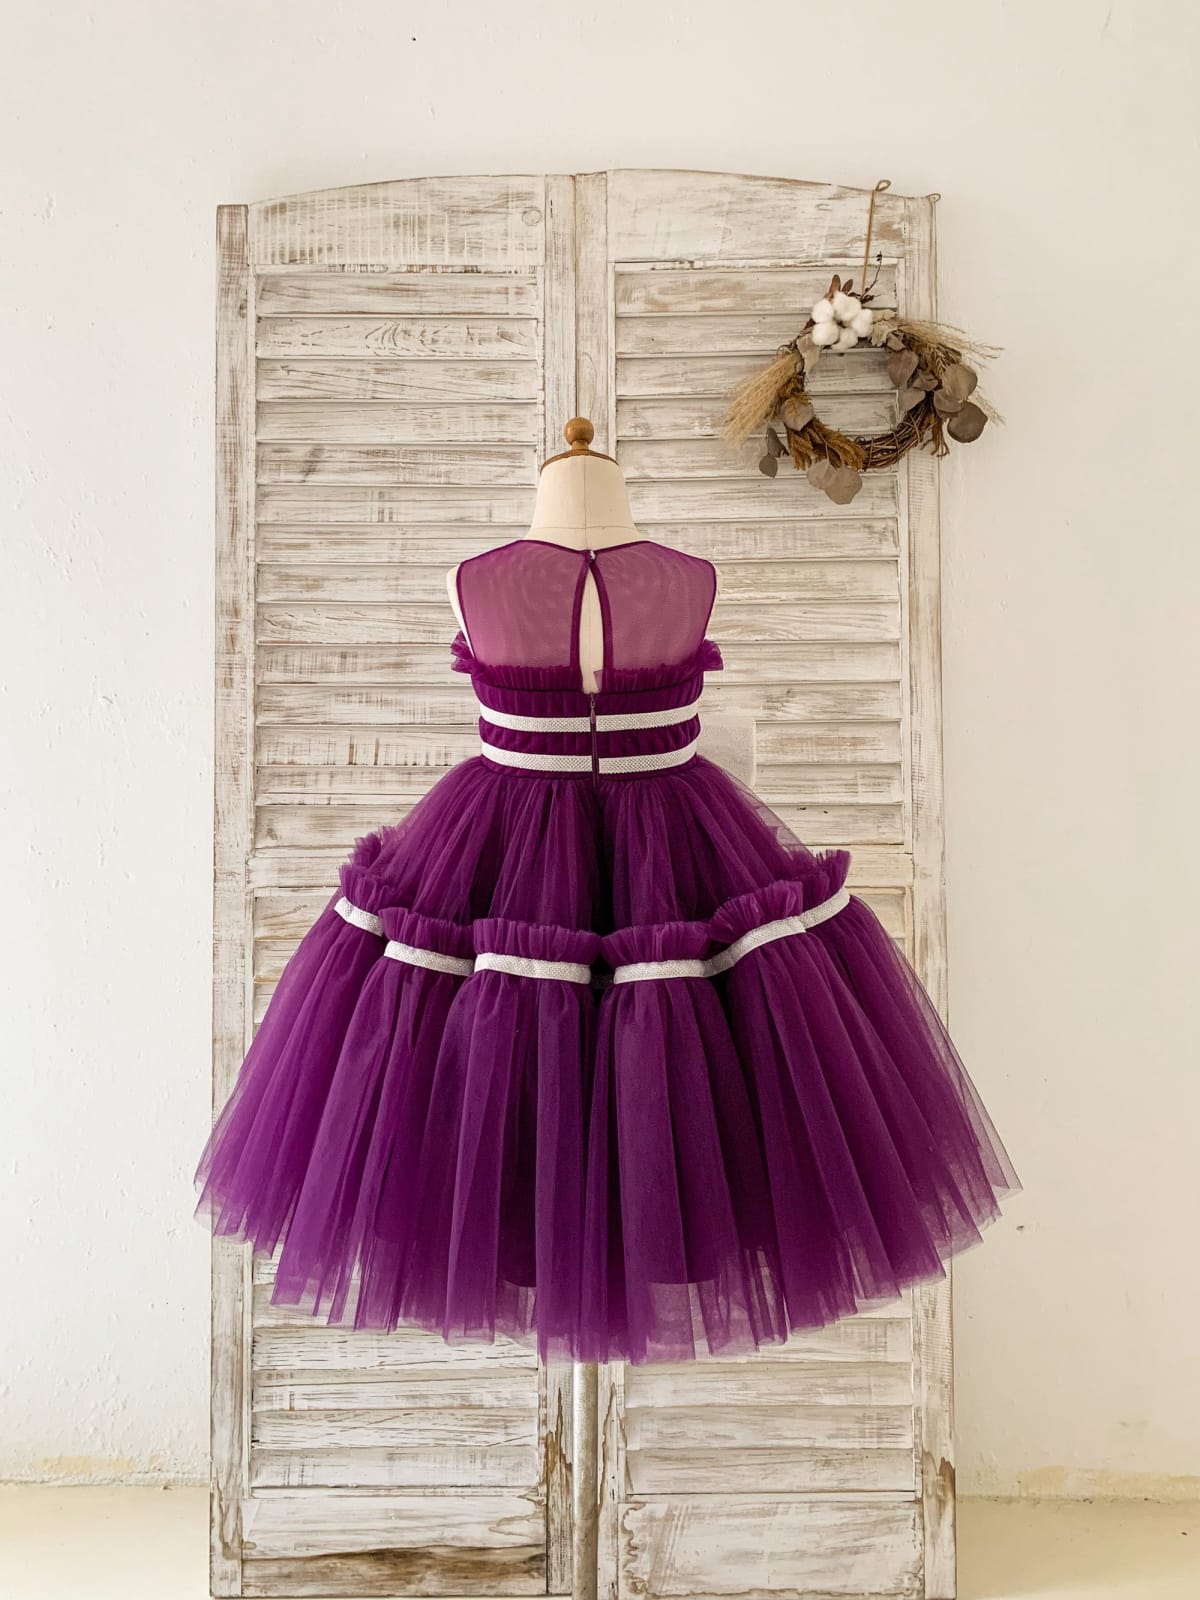 Princess Sheer Neck Pleated Purple Tulle Wedding Flower Girl Dress Kids Party, Bow